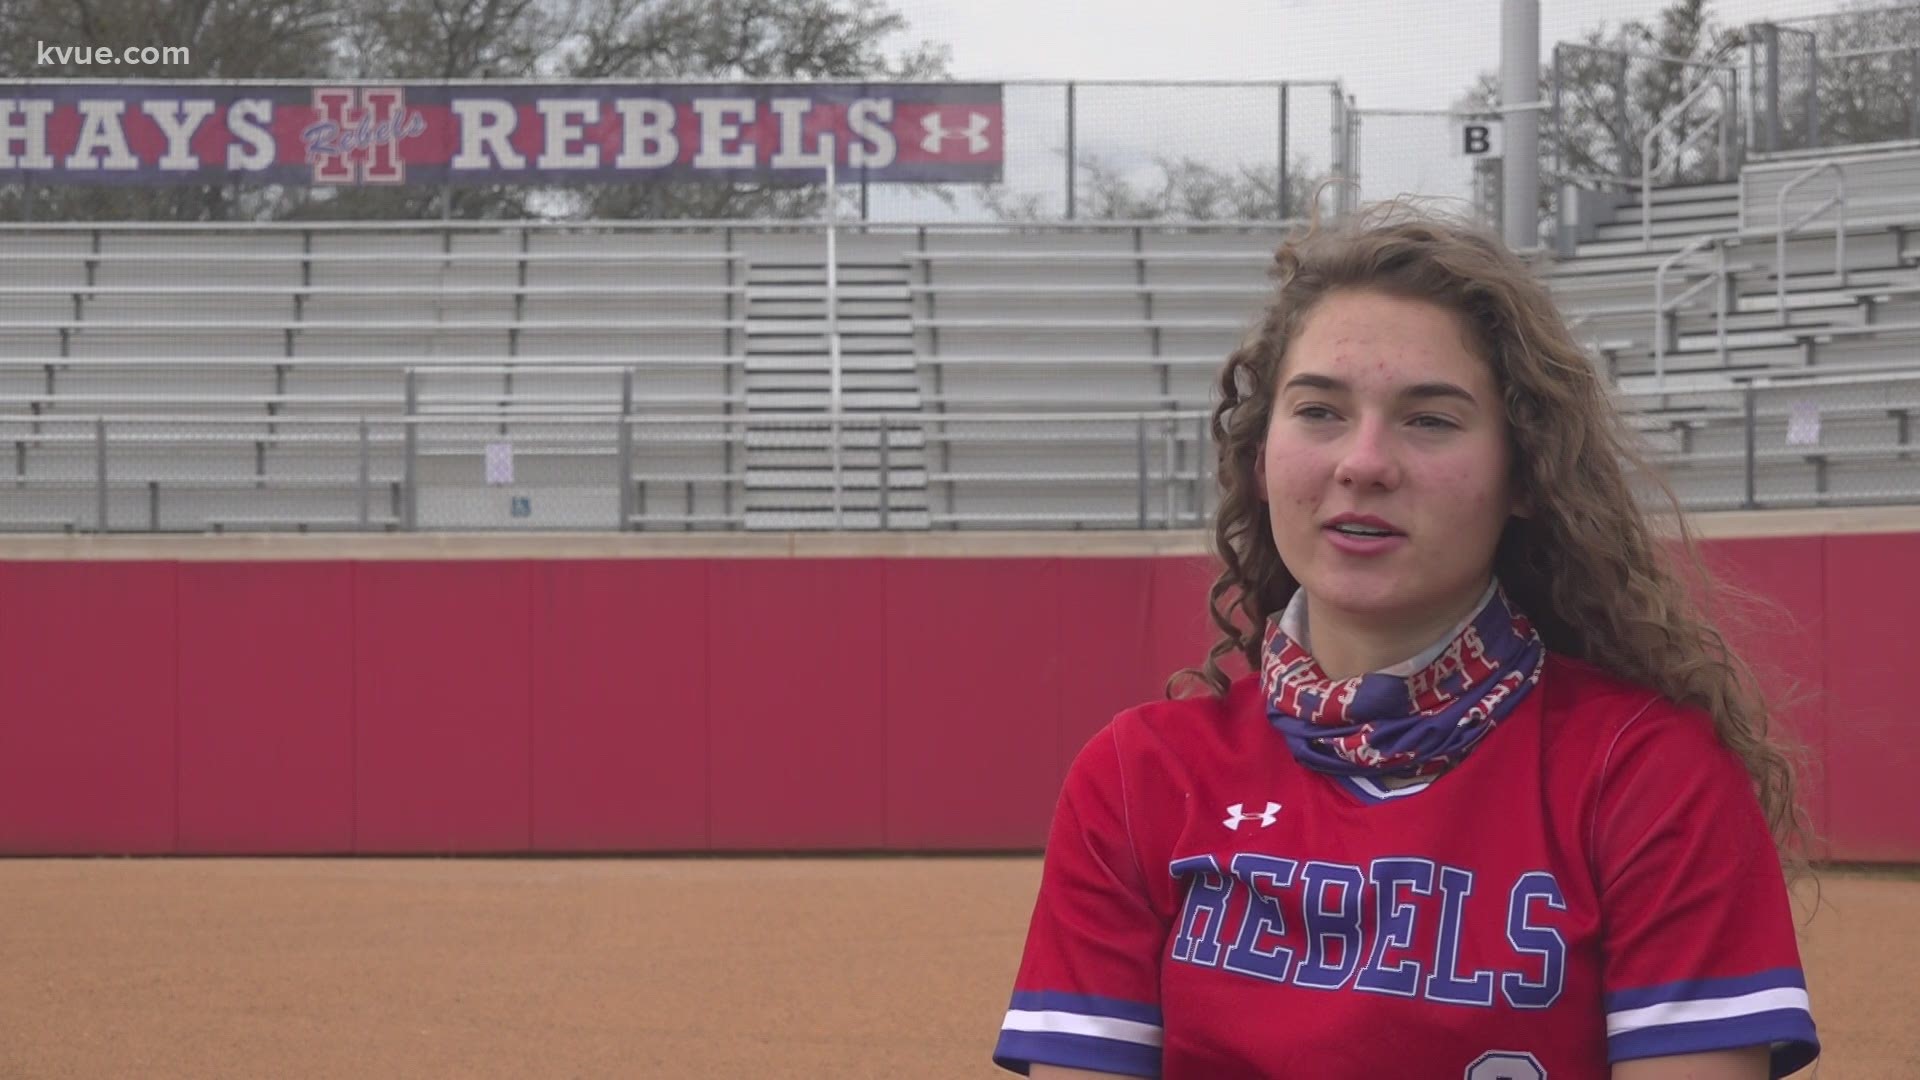 Megan Kelnar talks to KVUE about her return to Hays softball. She said breaking her leg made her stronger.